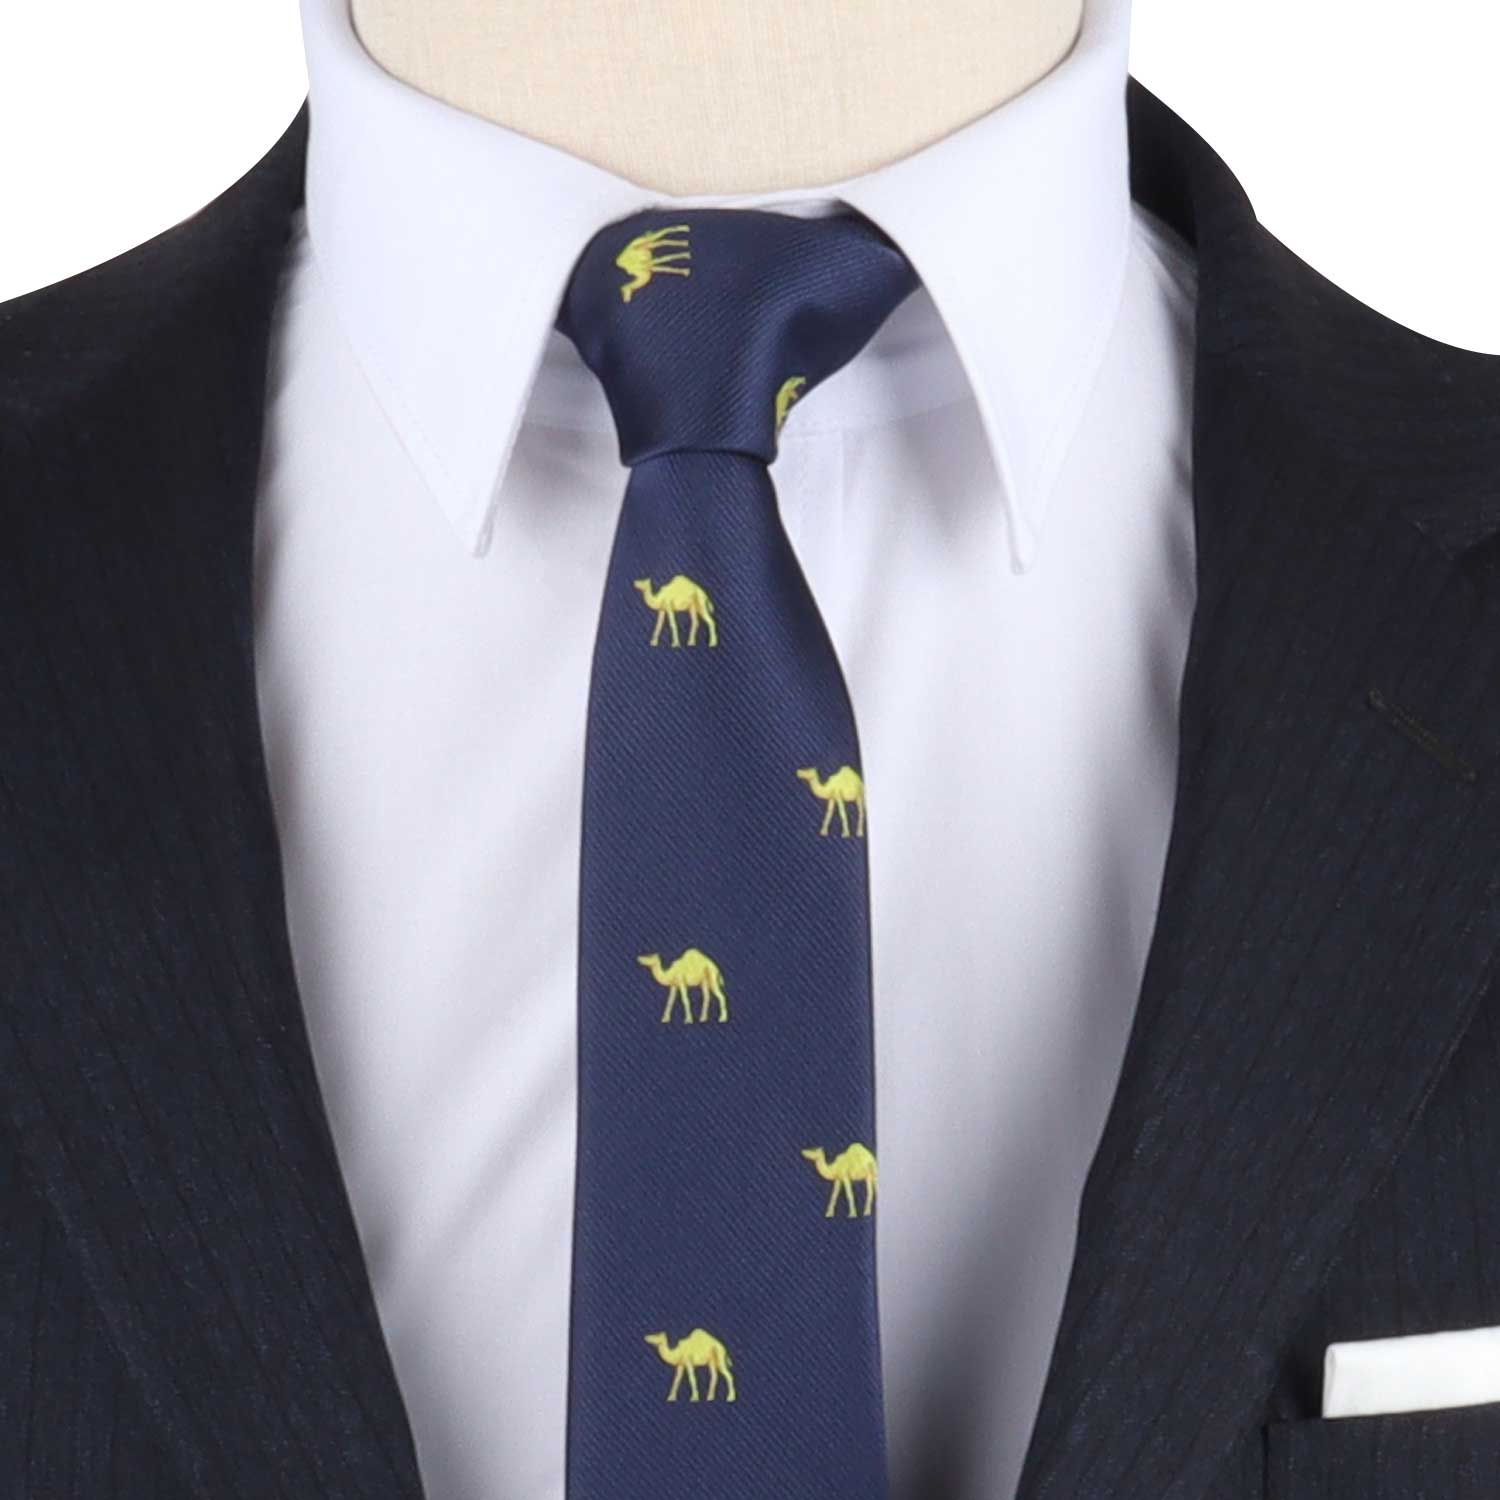 A Camel Skinny Tie, adding a touch of Desert charm.